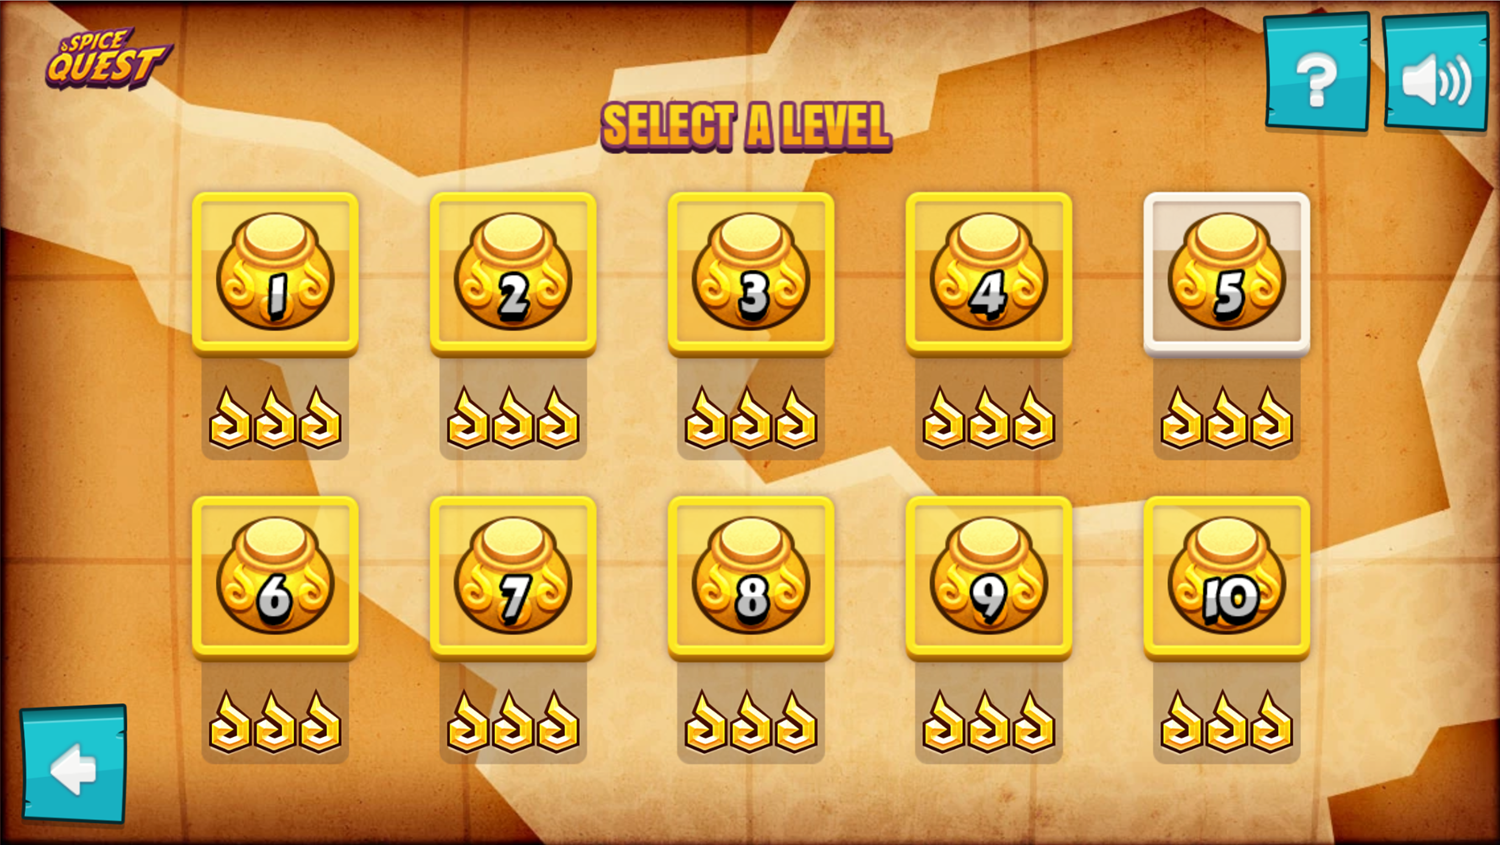 Spice Quest Game Level Select Screen Screenshot.